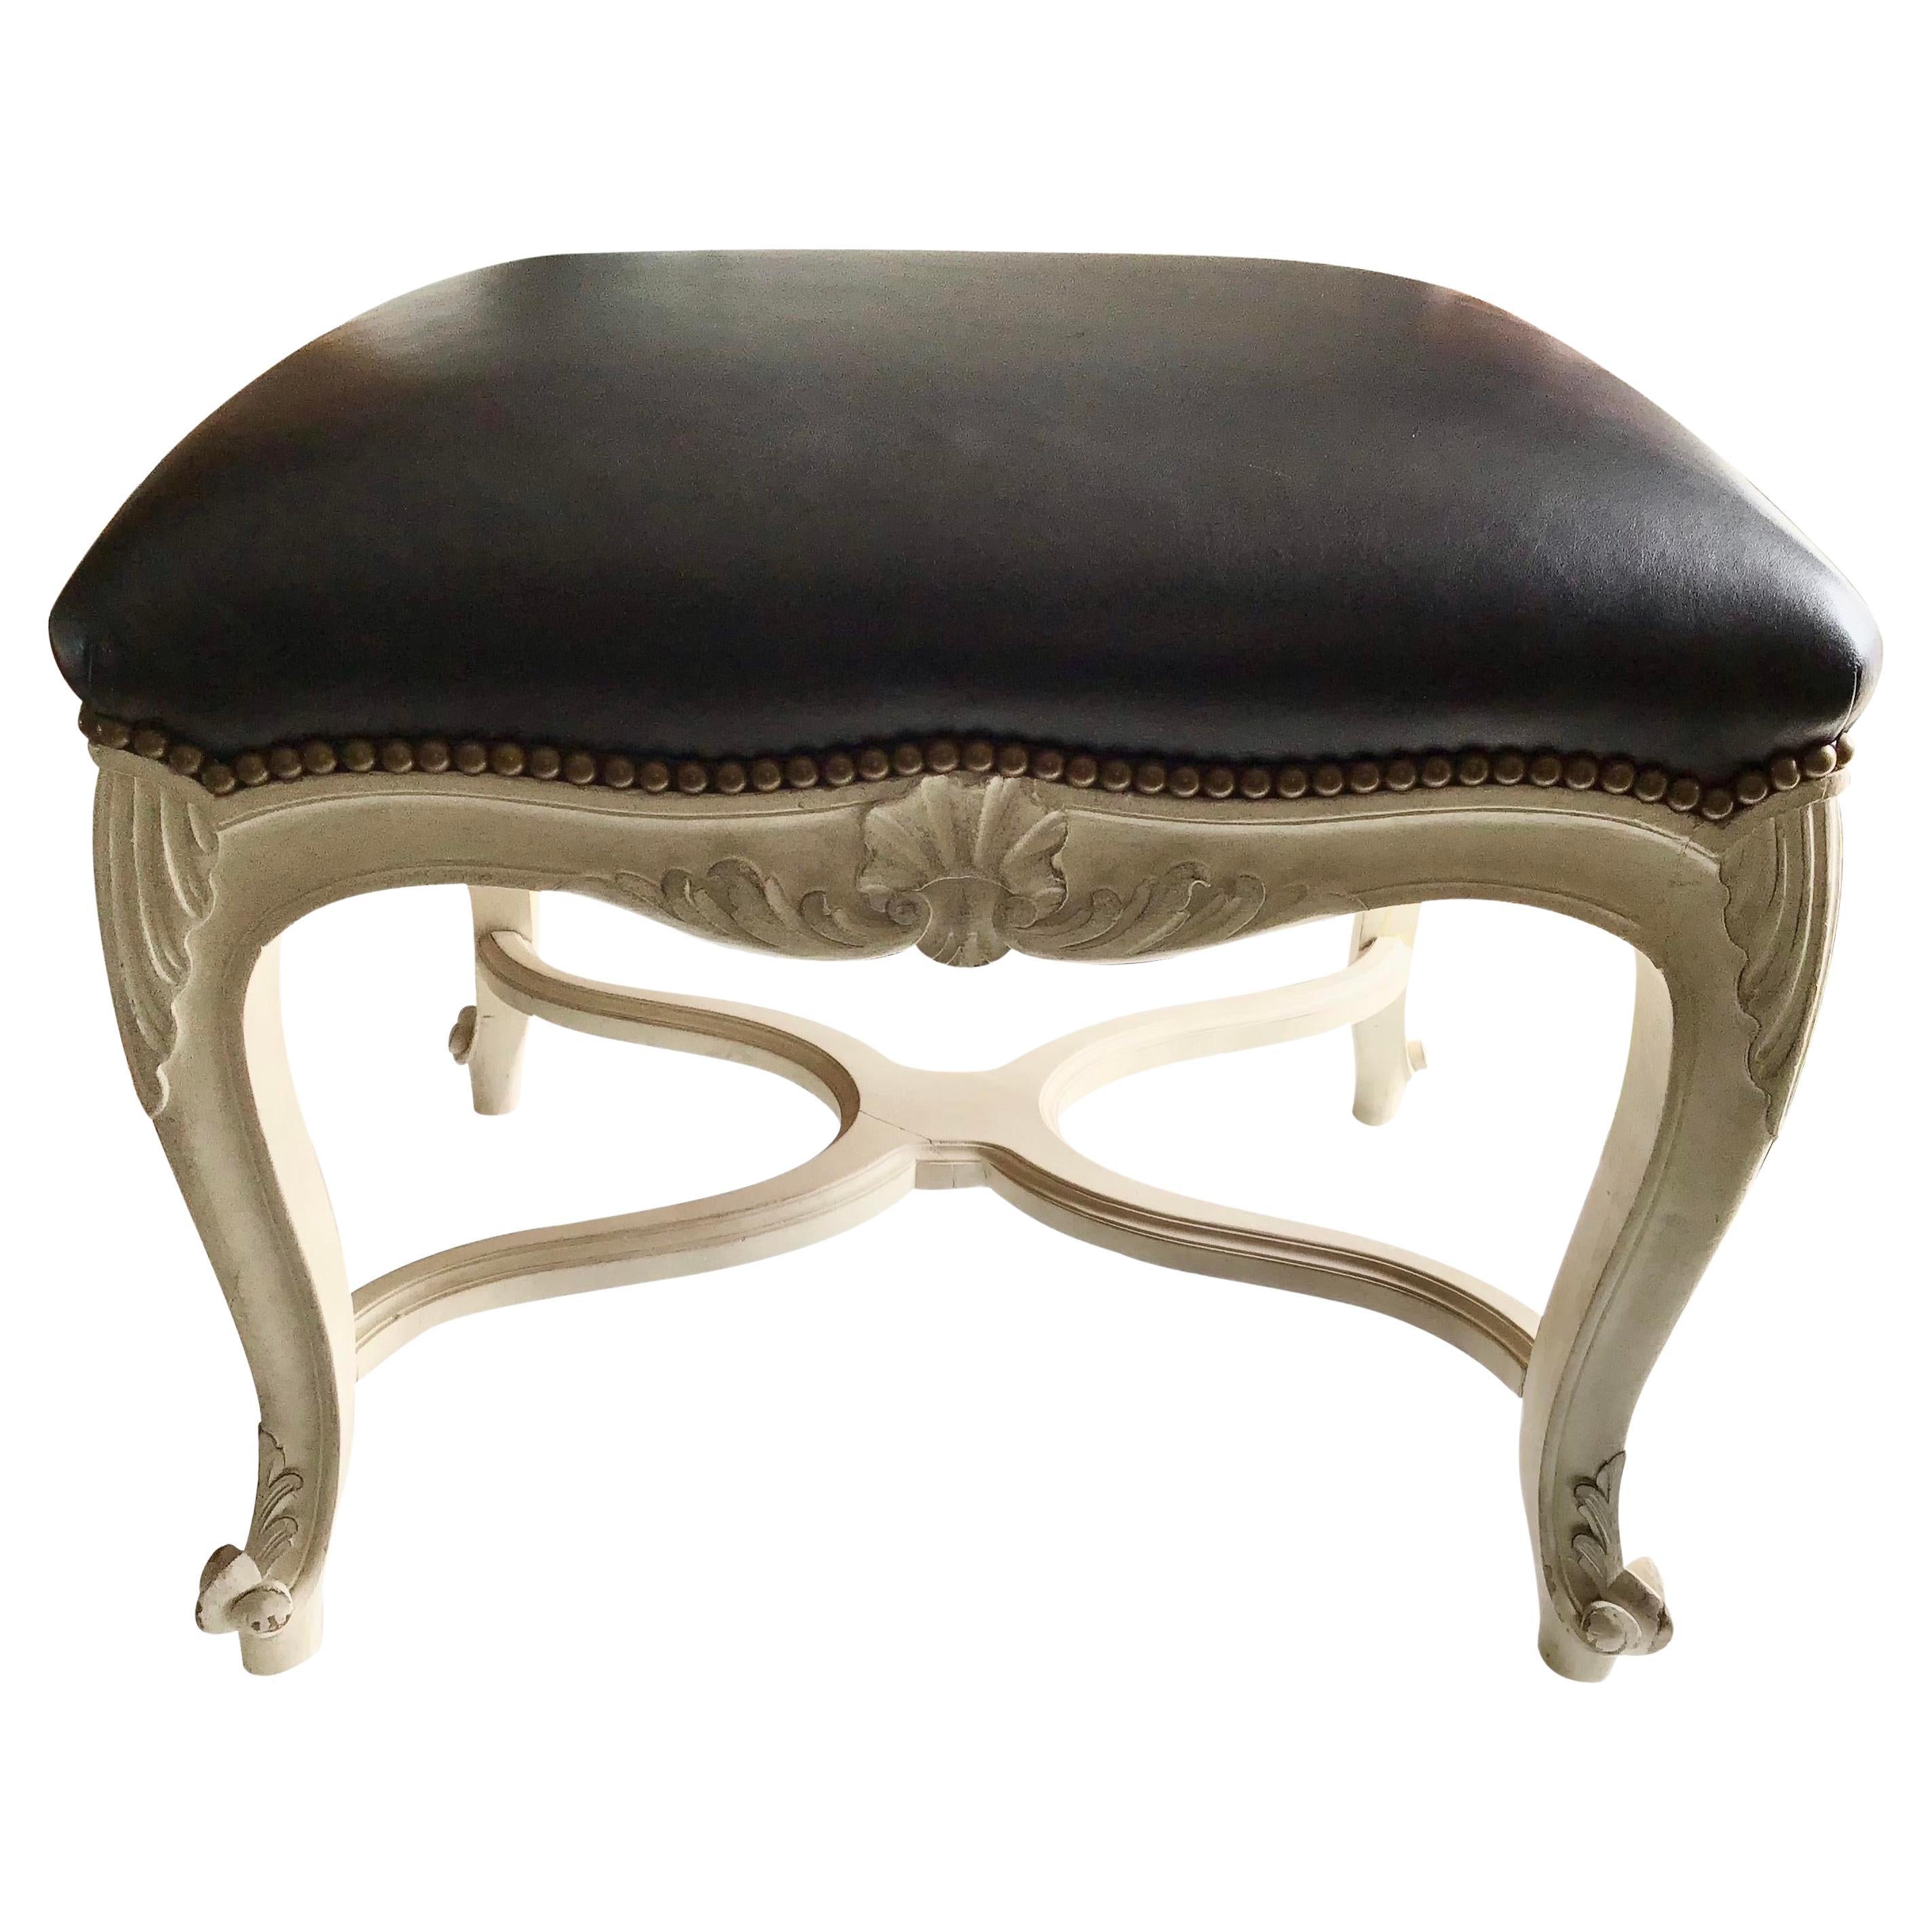 French Louis XV Bench with Black Leather Upholstery